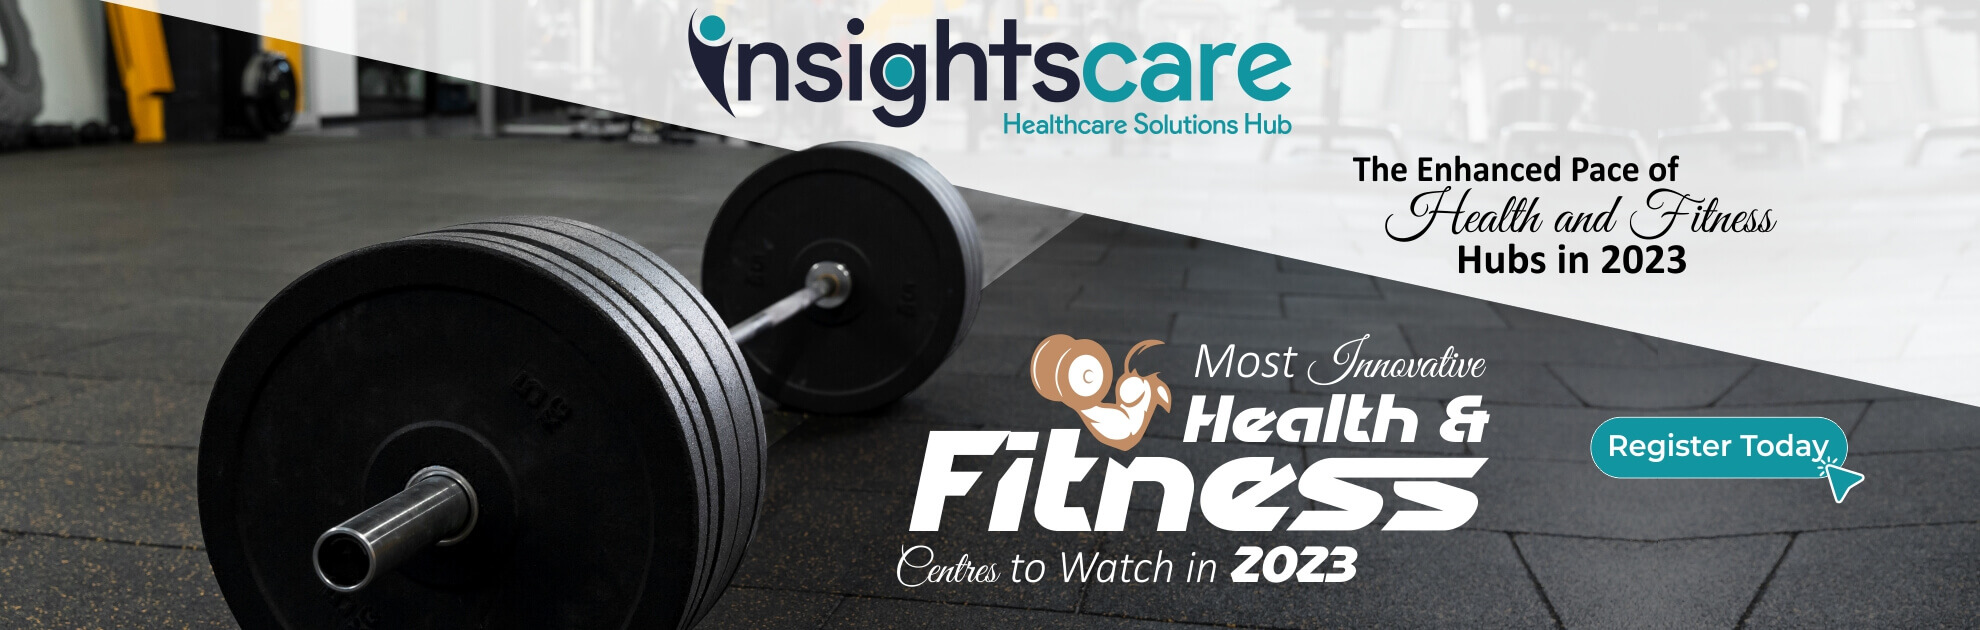 Most Innovative Health & Fitness Centres to Watch in 2023